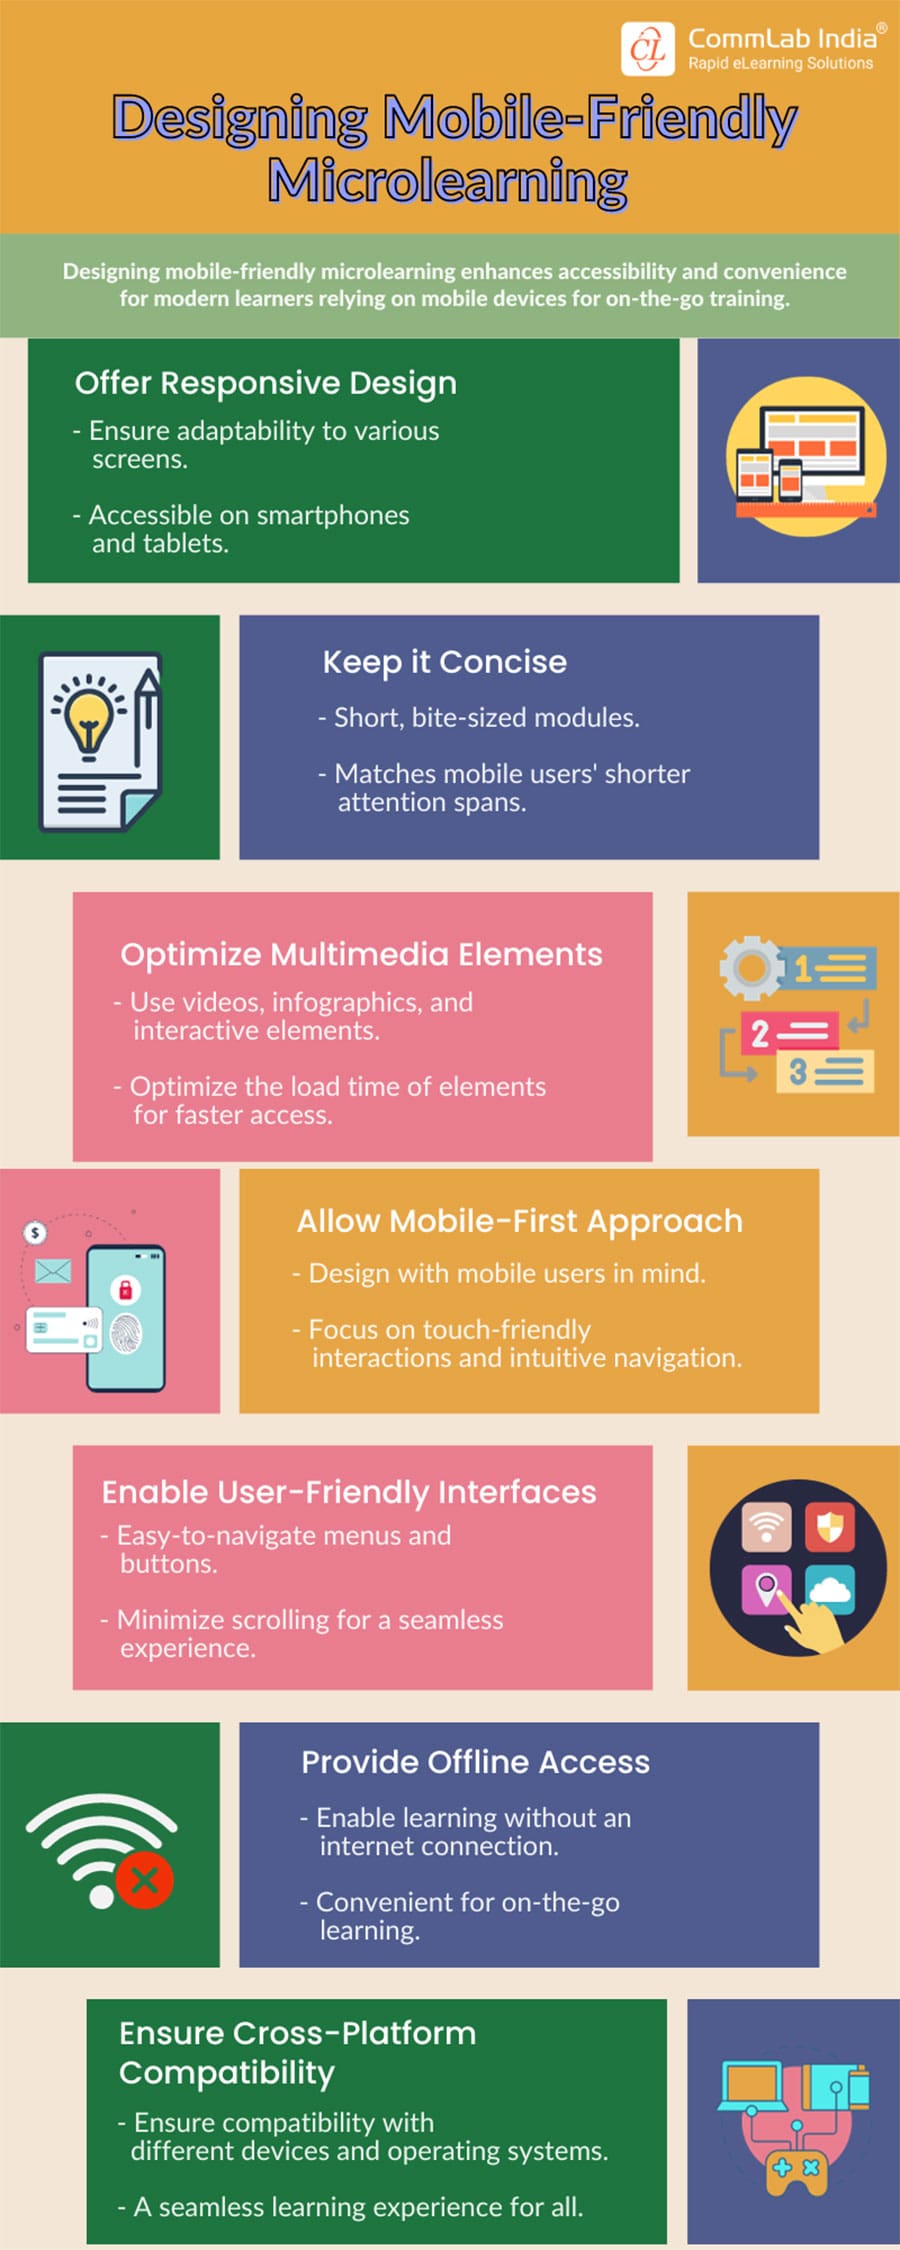 7 Tips to Design Mobile-Friendly Microlearning